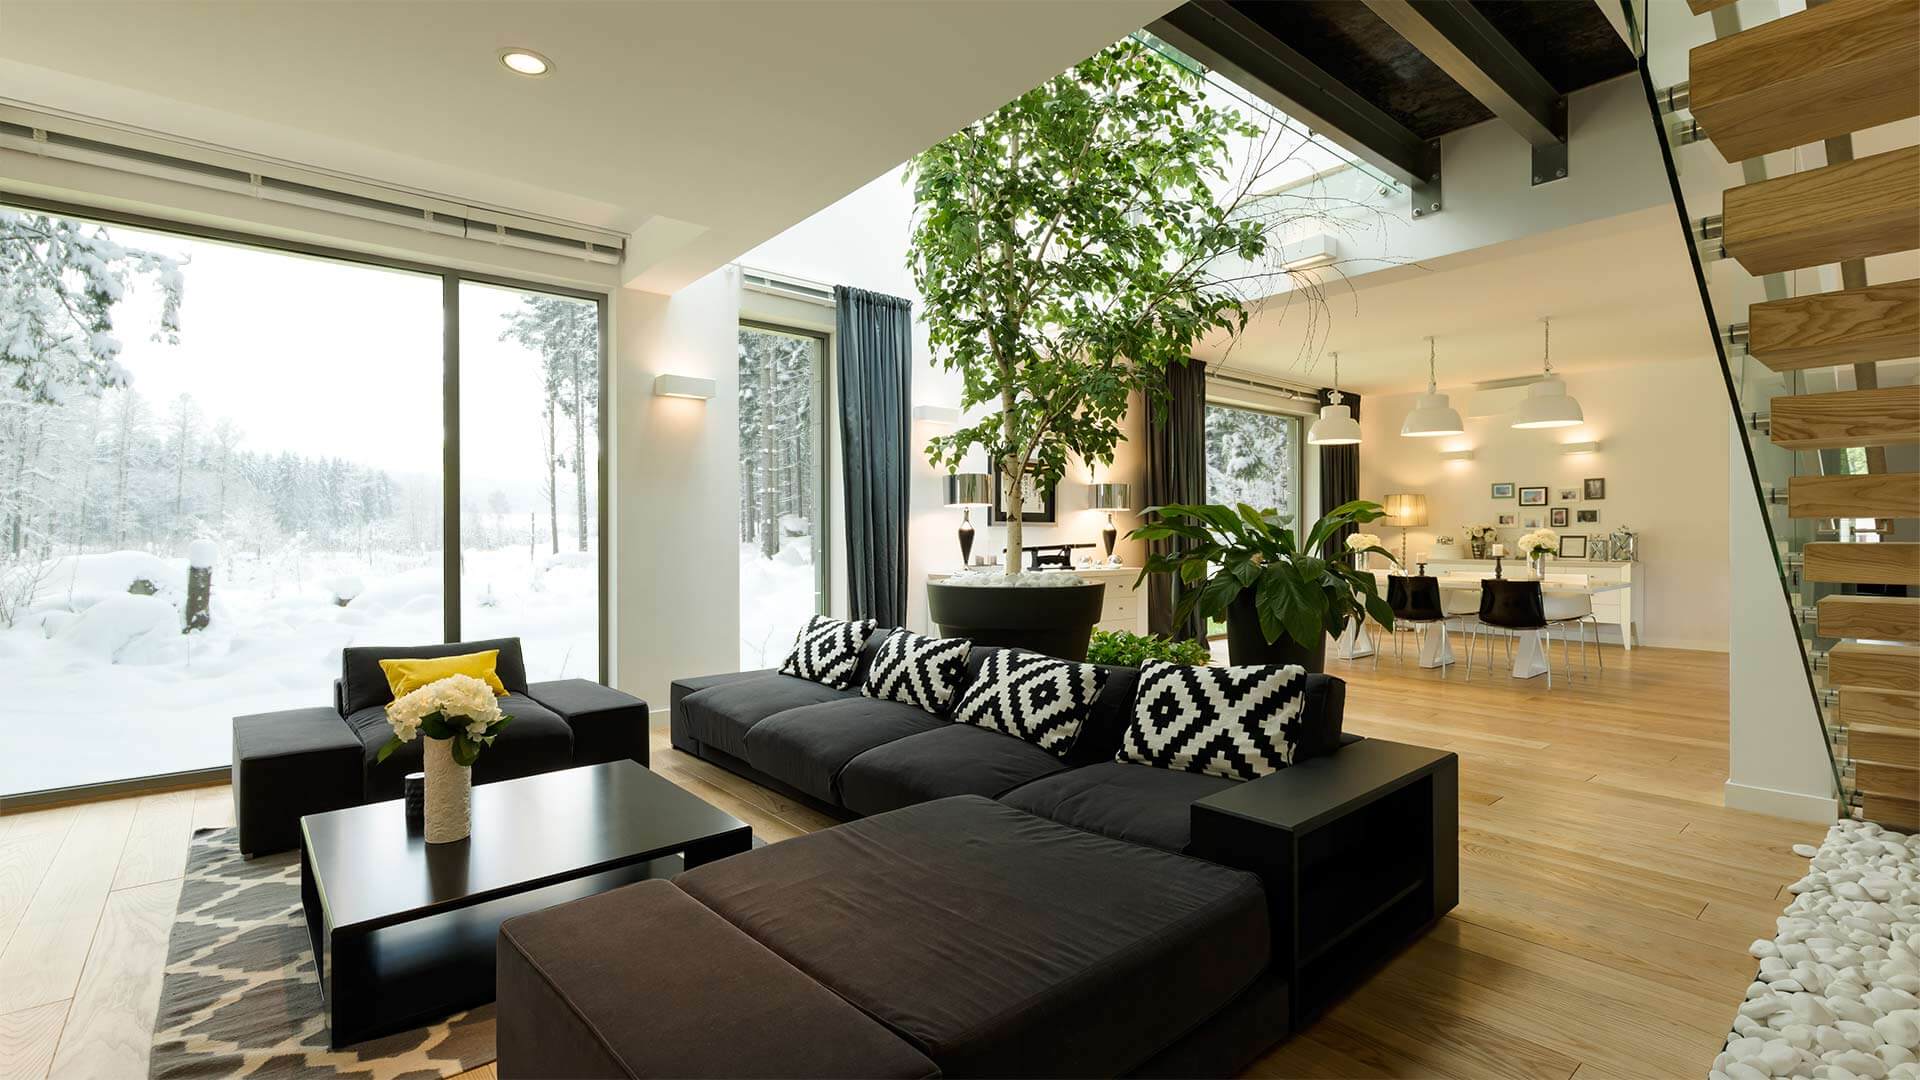 A home interior with large patio windows and plants.